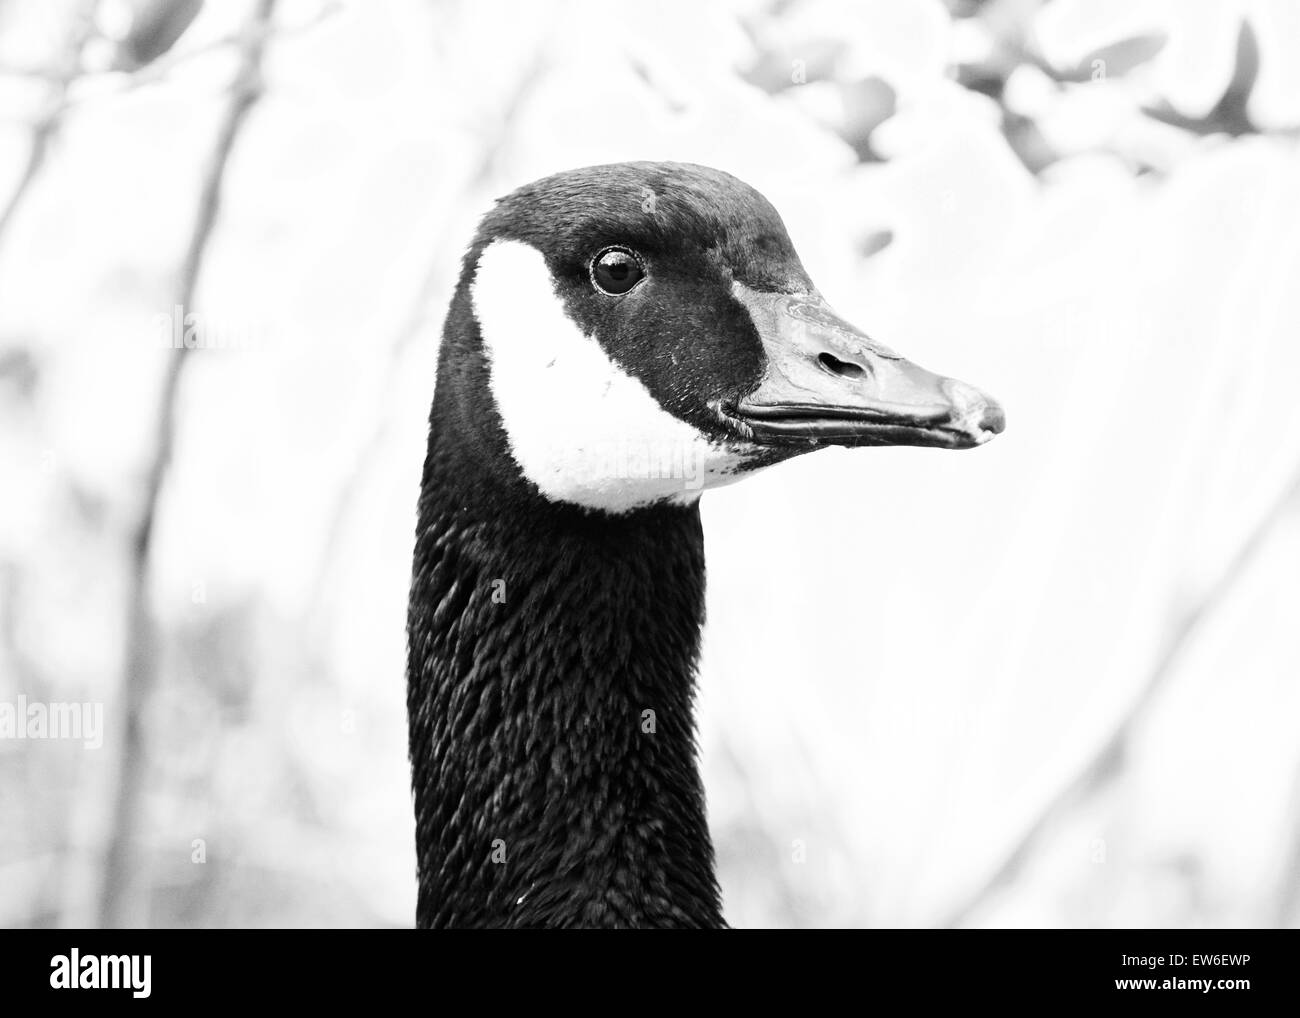 Goose neck Black and White Stock Photos & Images - Alamy